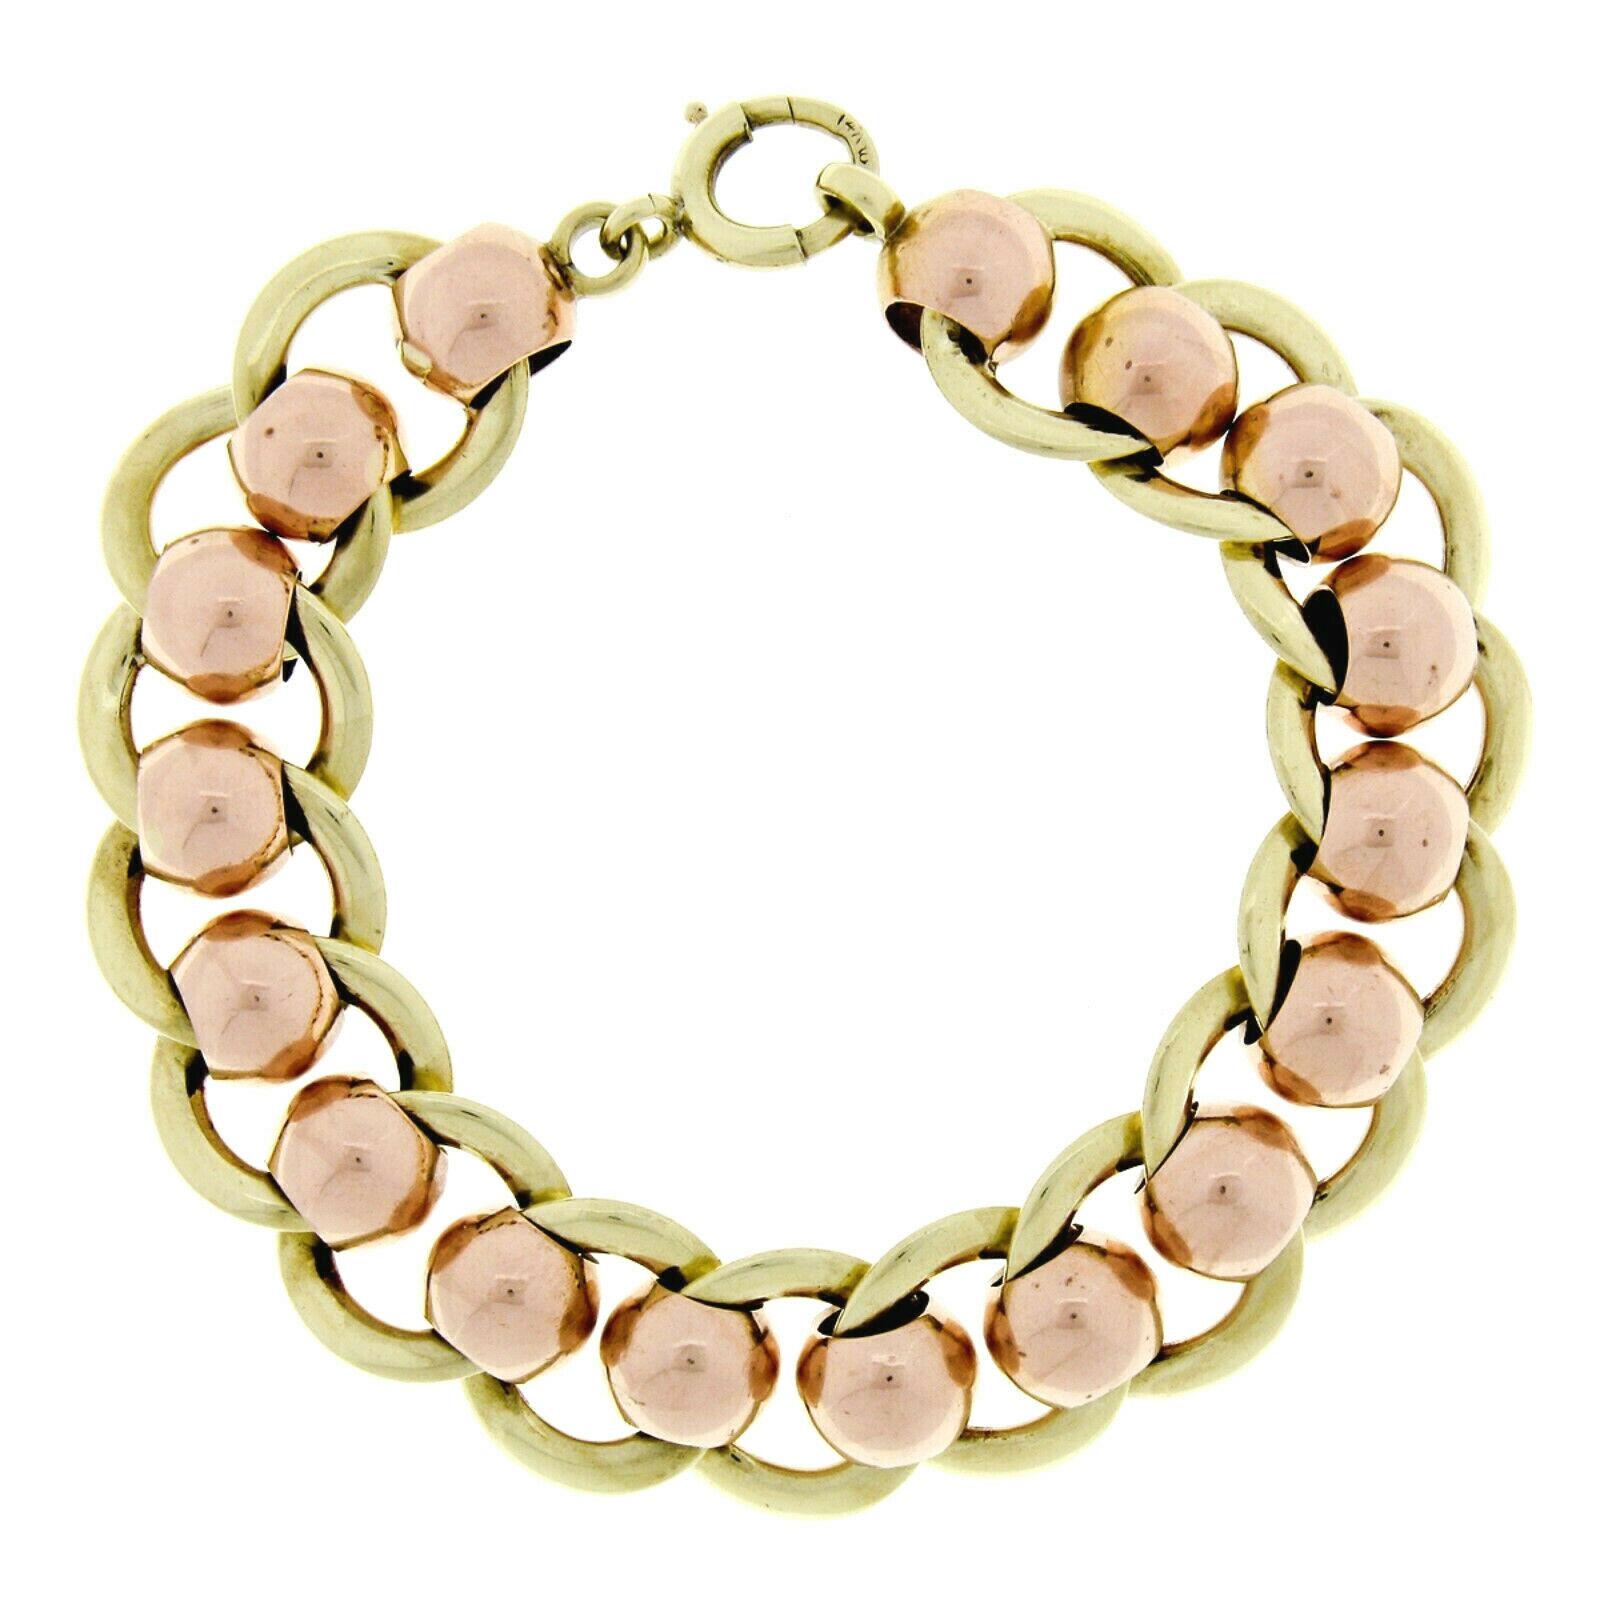 Women's Retro Vintage 14k Rose Green Gold Wide Ball & Flat Cable Link Chain Bracelet